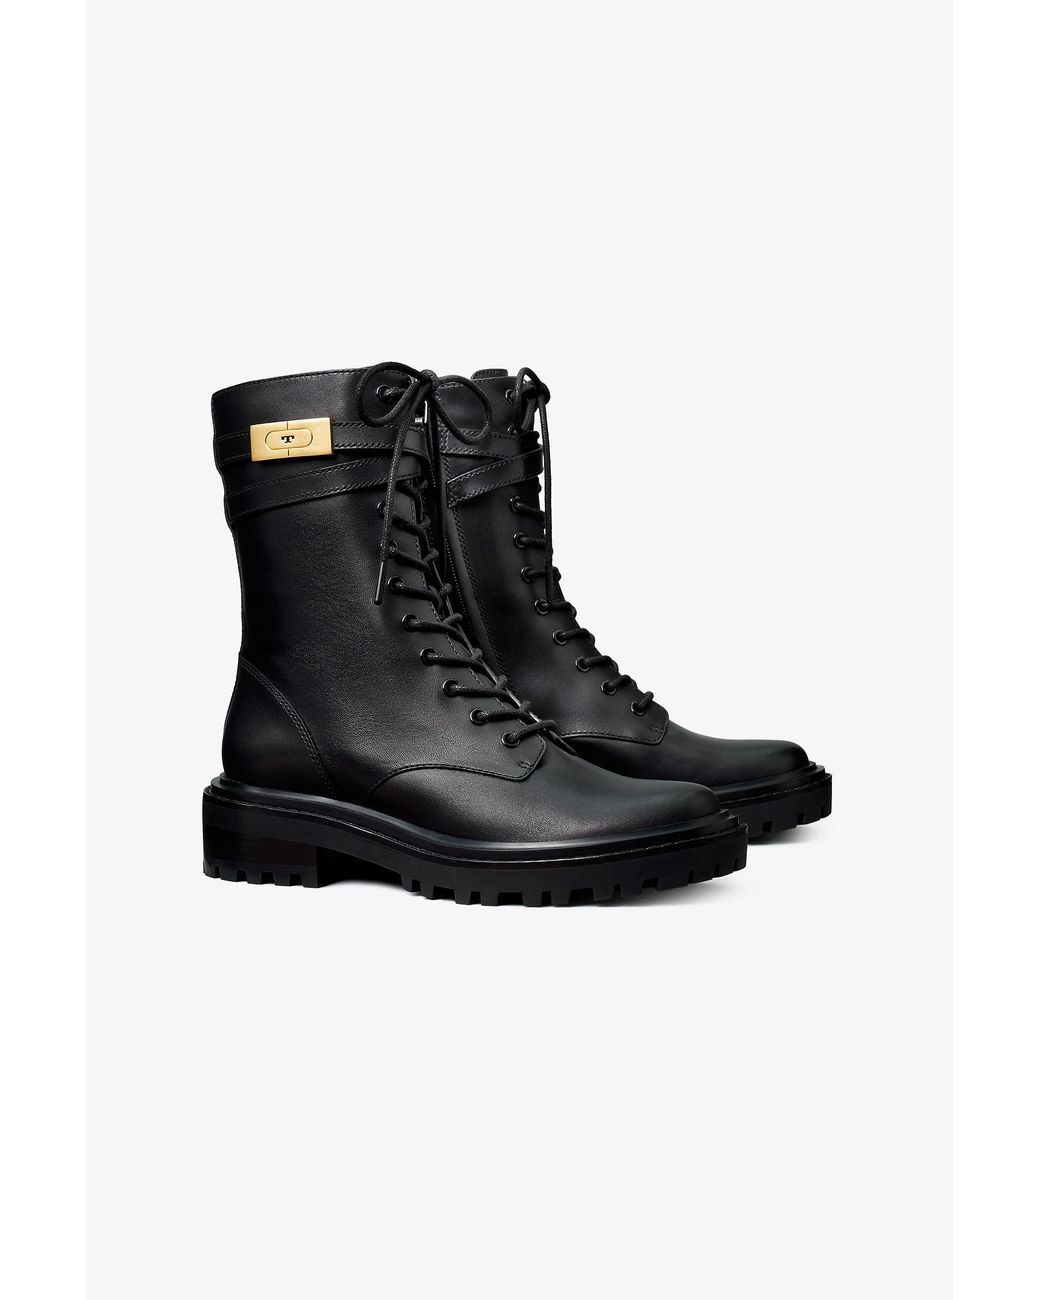 Tory Burch Leather Combat Boots in Black | Lyst